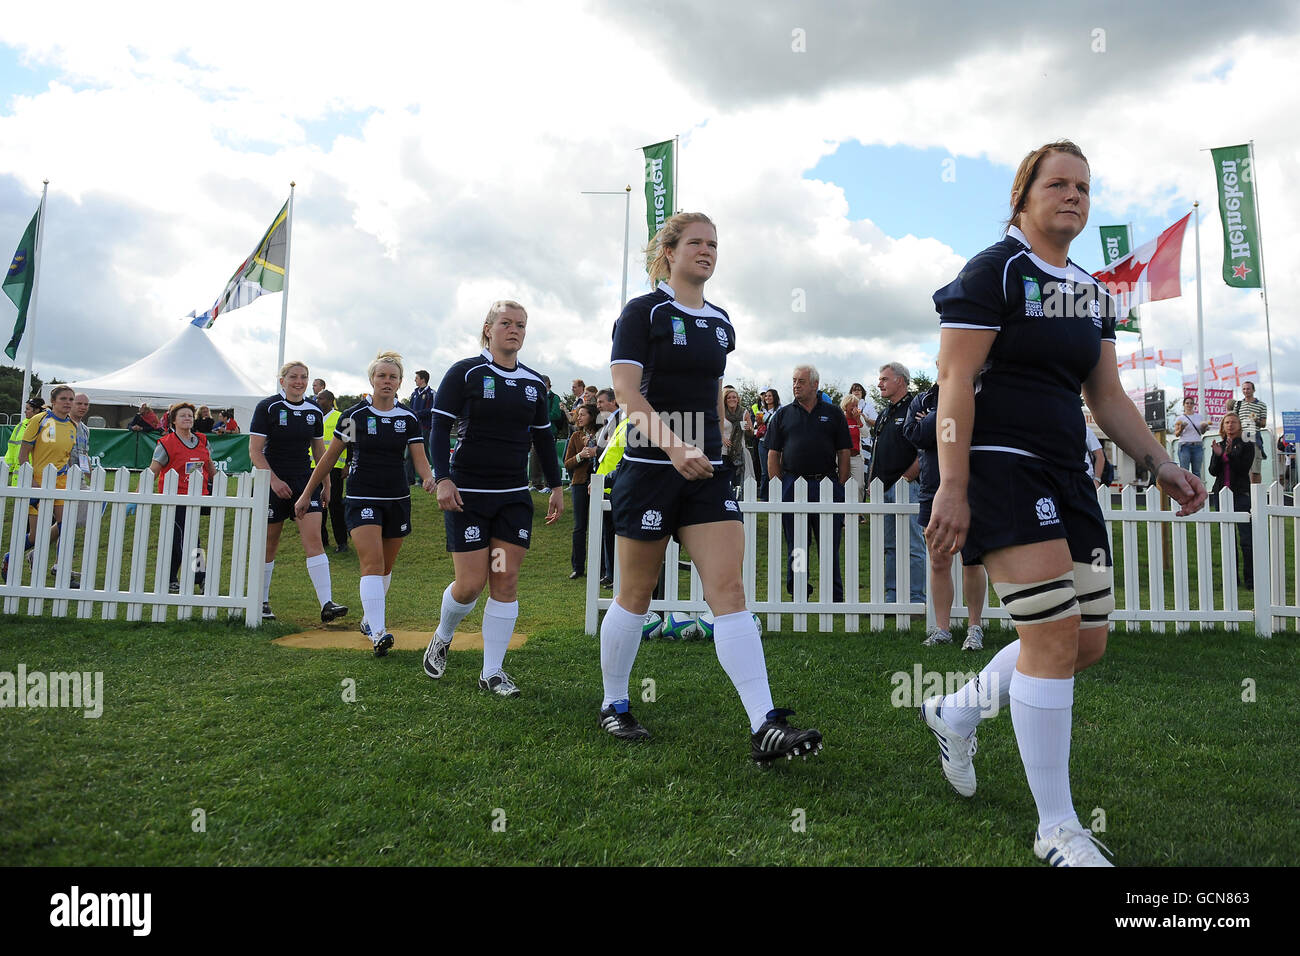 Rugby Union - Women's World Cup - Pool C - Scotland v Sweden - Surrey Sports Park. Scotland's Louise Moffat (r) walks out for the game against Sweden Stock Photo